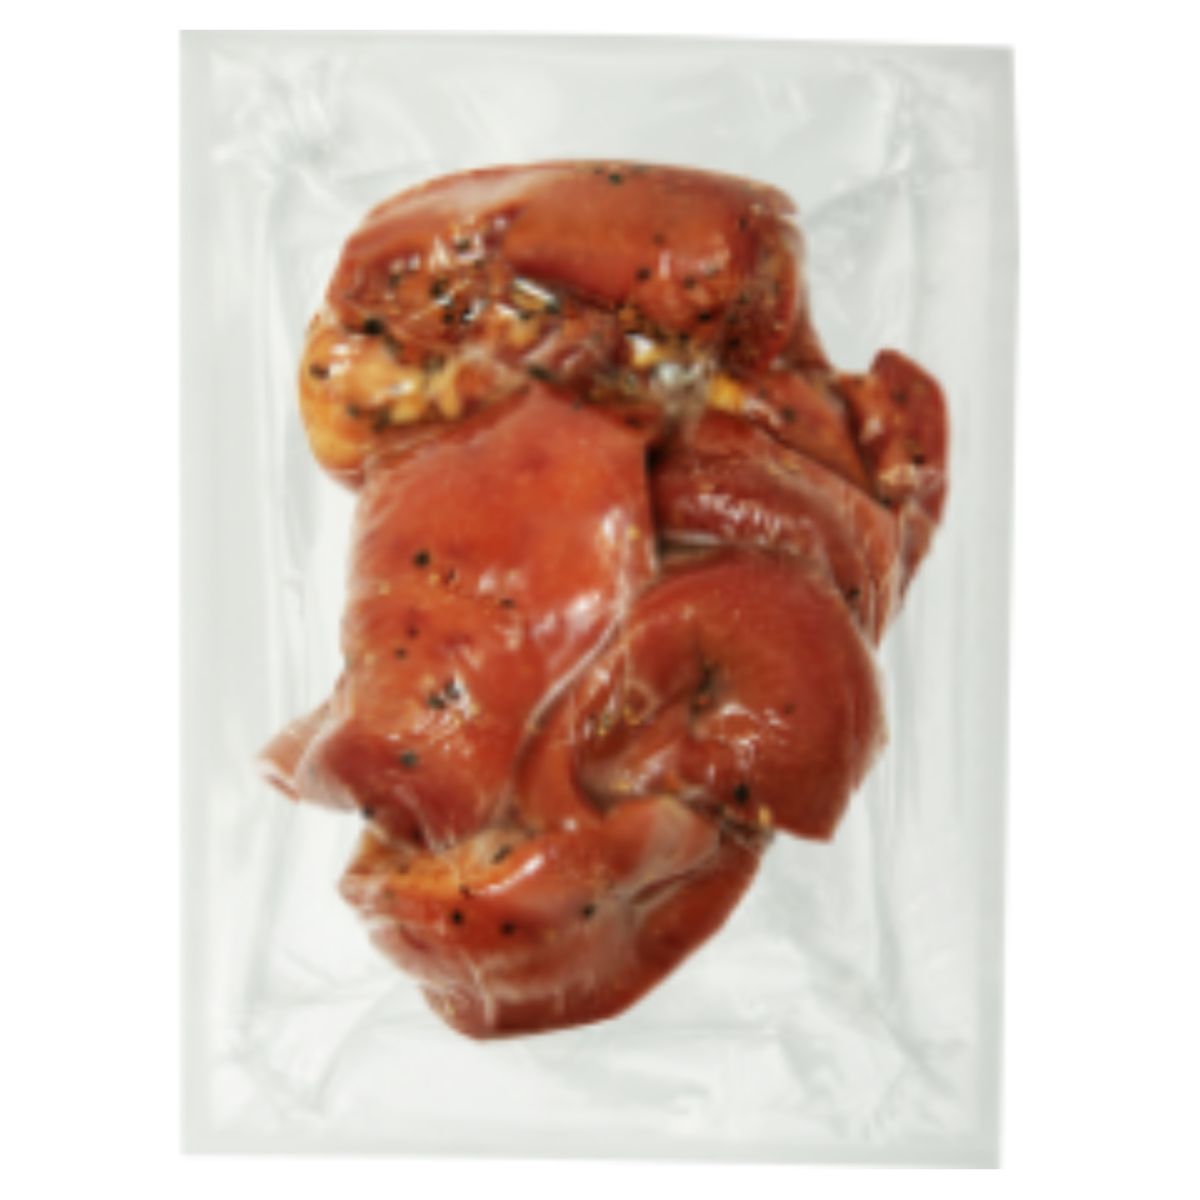 A Sokolow - Pork Ears - (Varies) in a plastic bag on a white background.